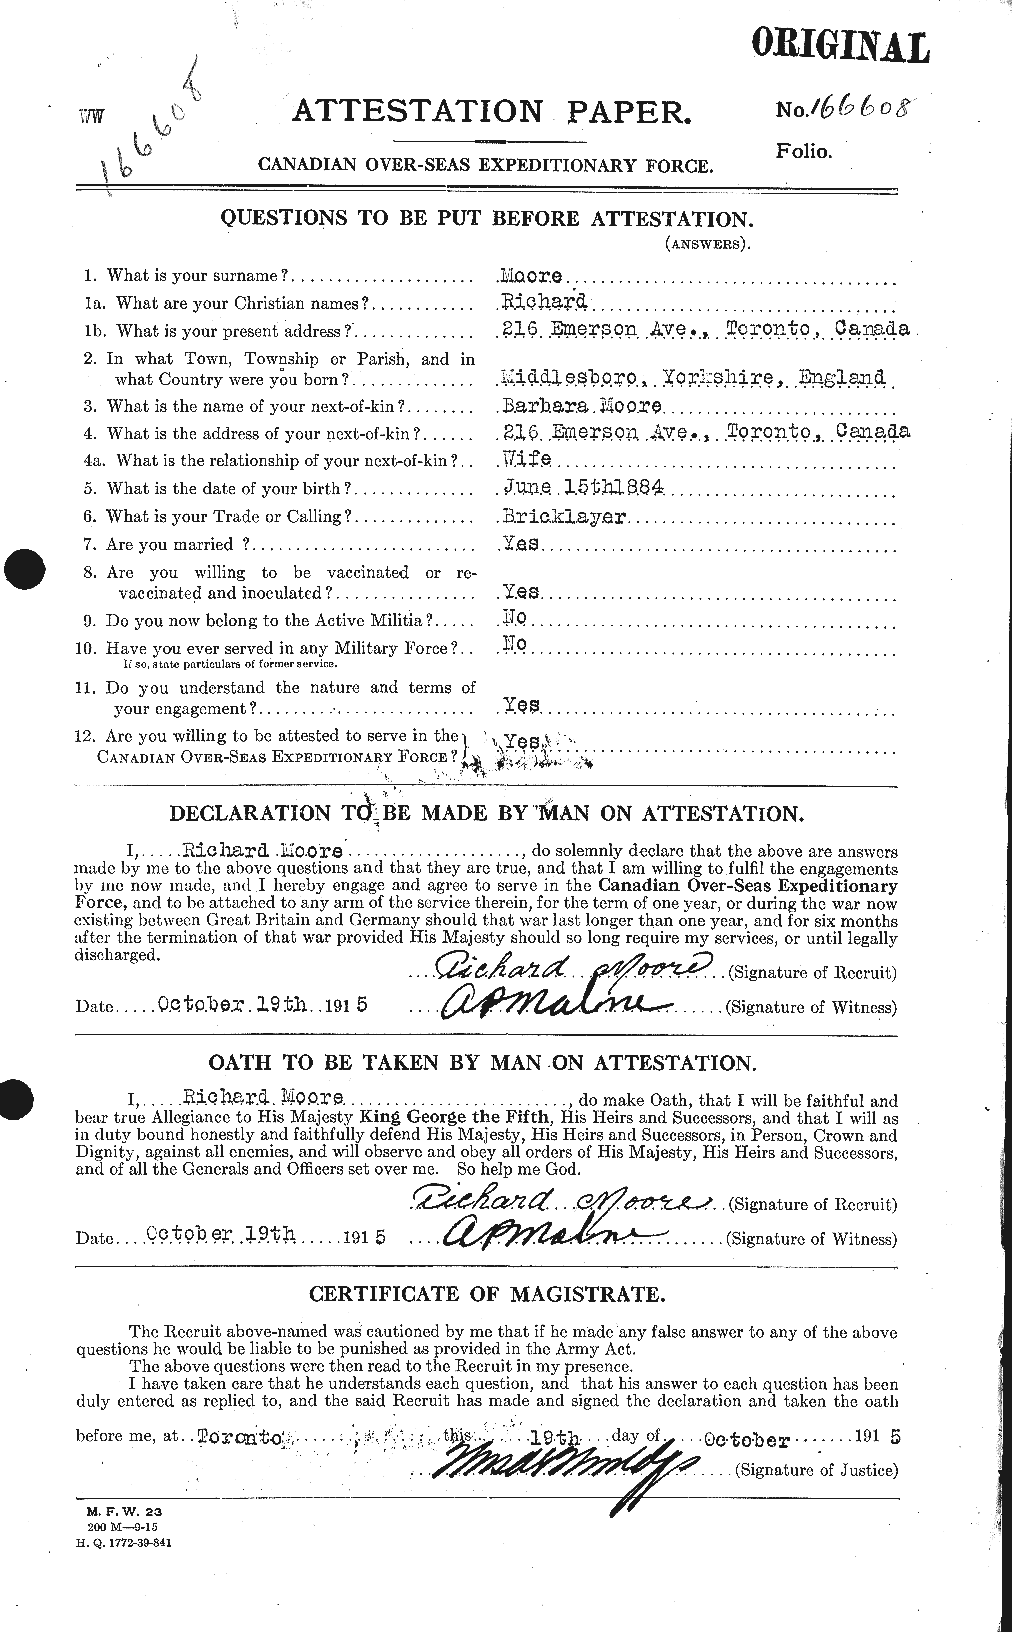 Personnel Records of the First World War - CEF 503530a